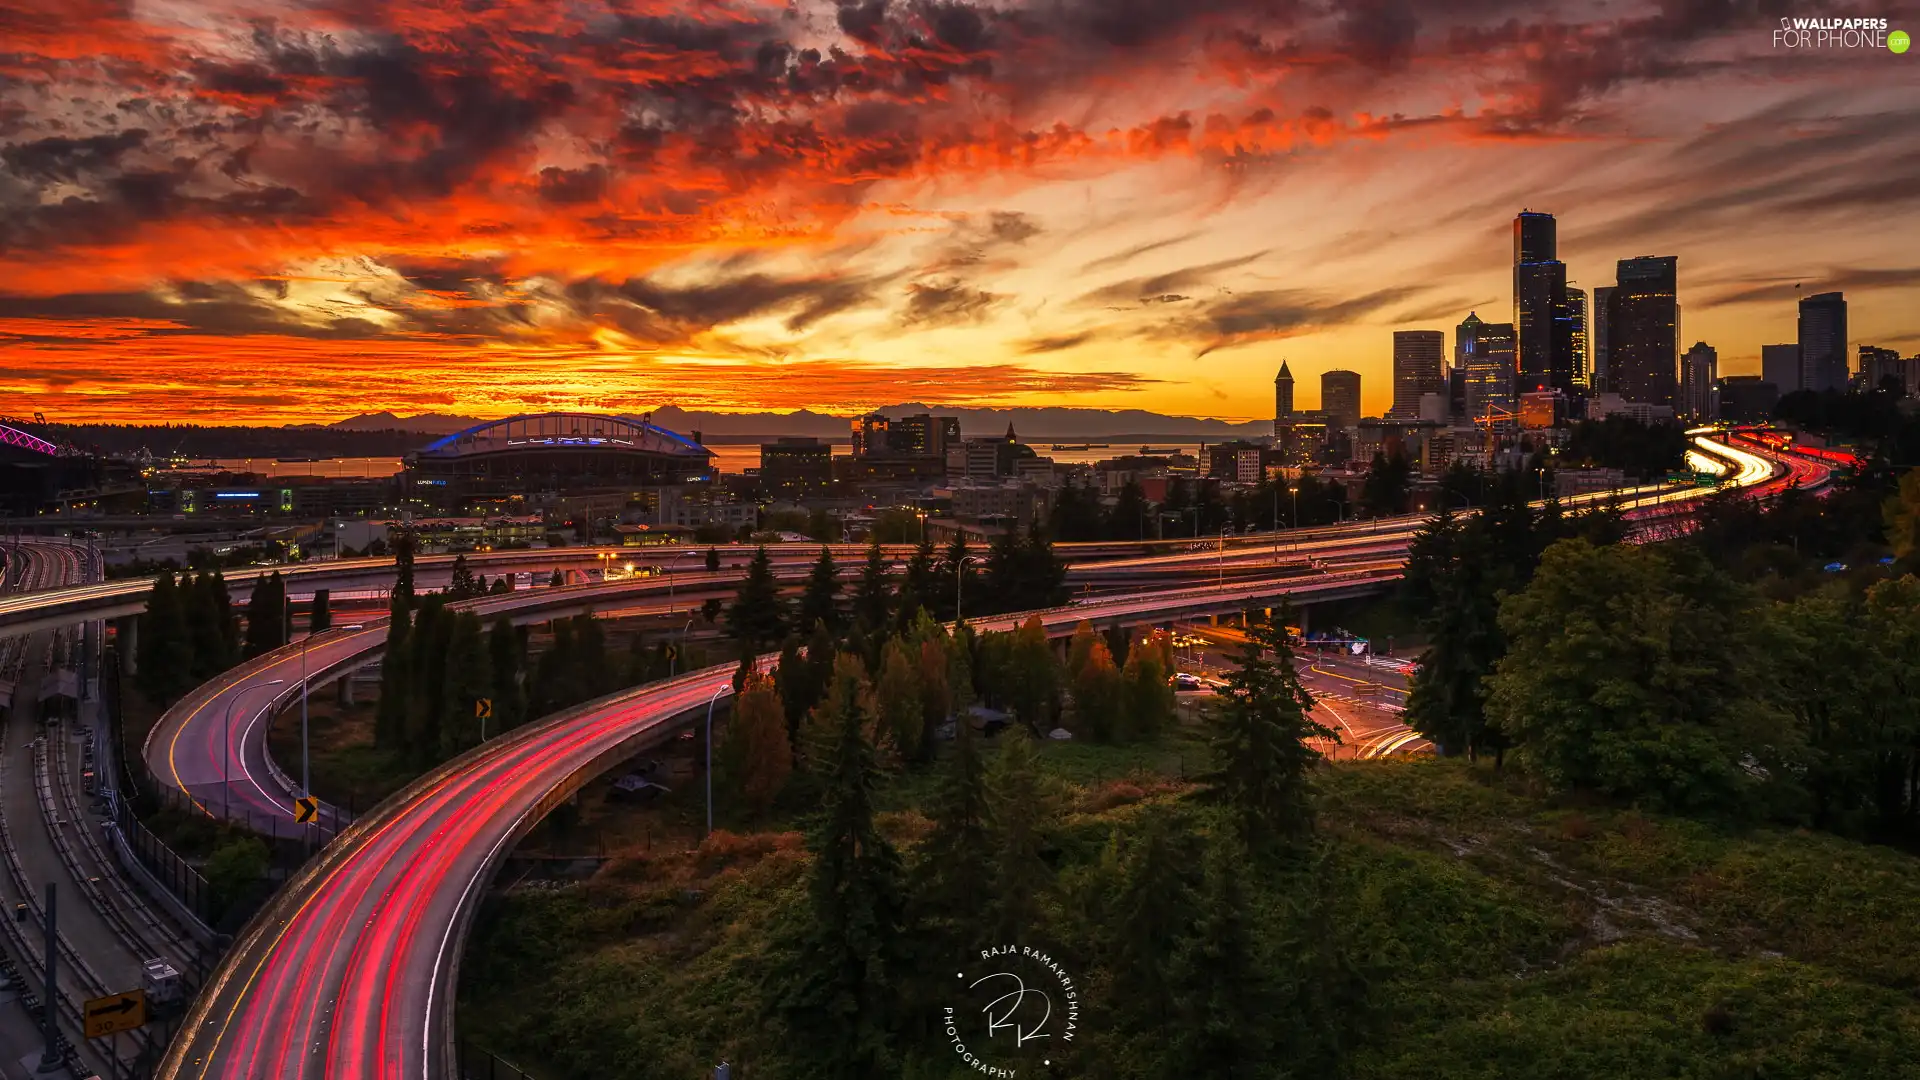 Town, Street, Washington State, Way, Great Sunsets, Seattle, The United States